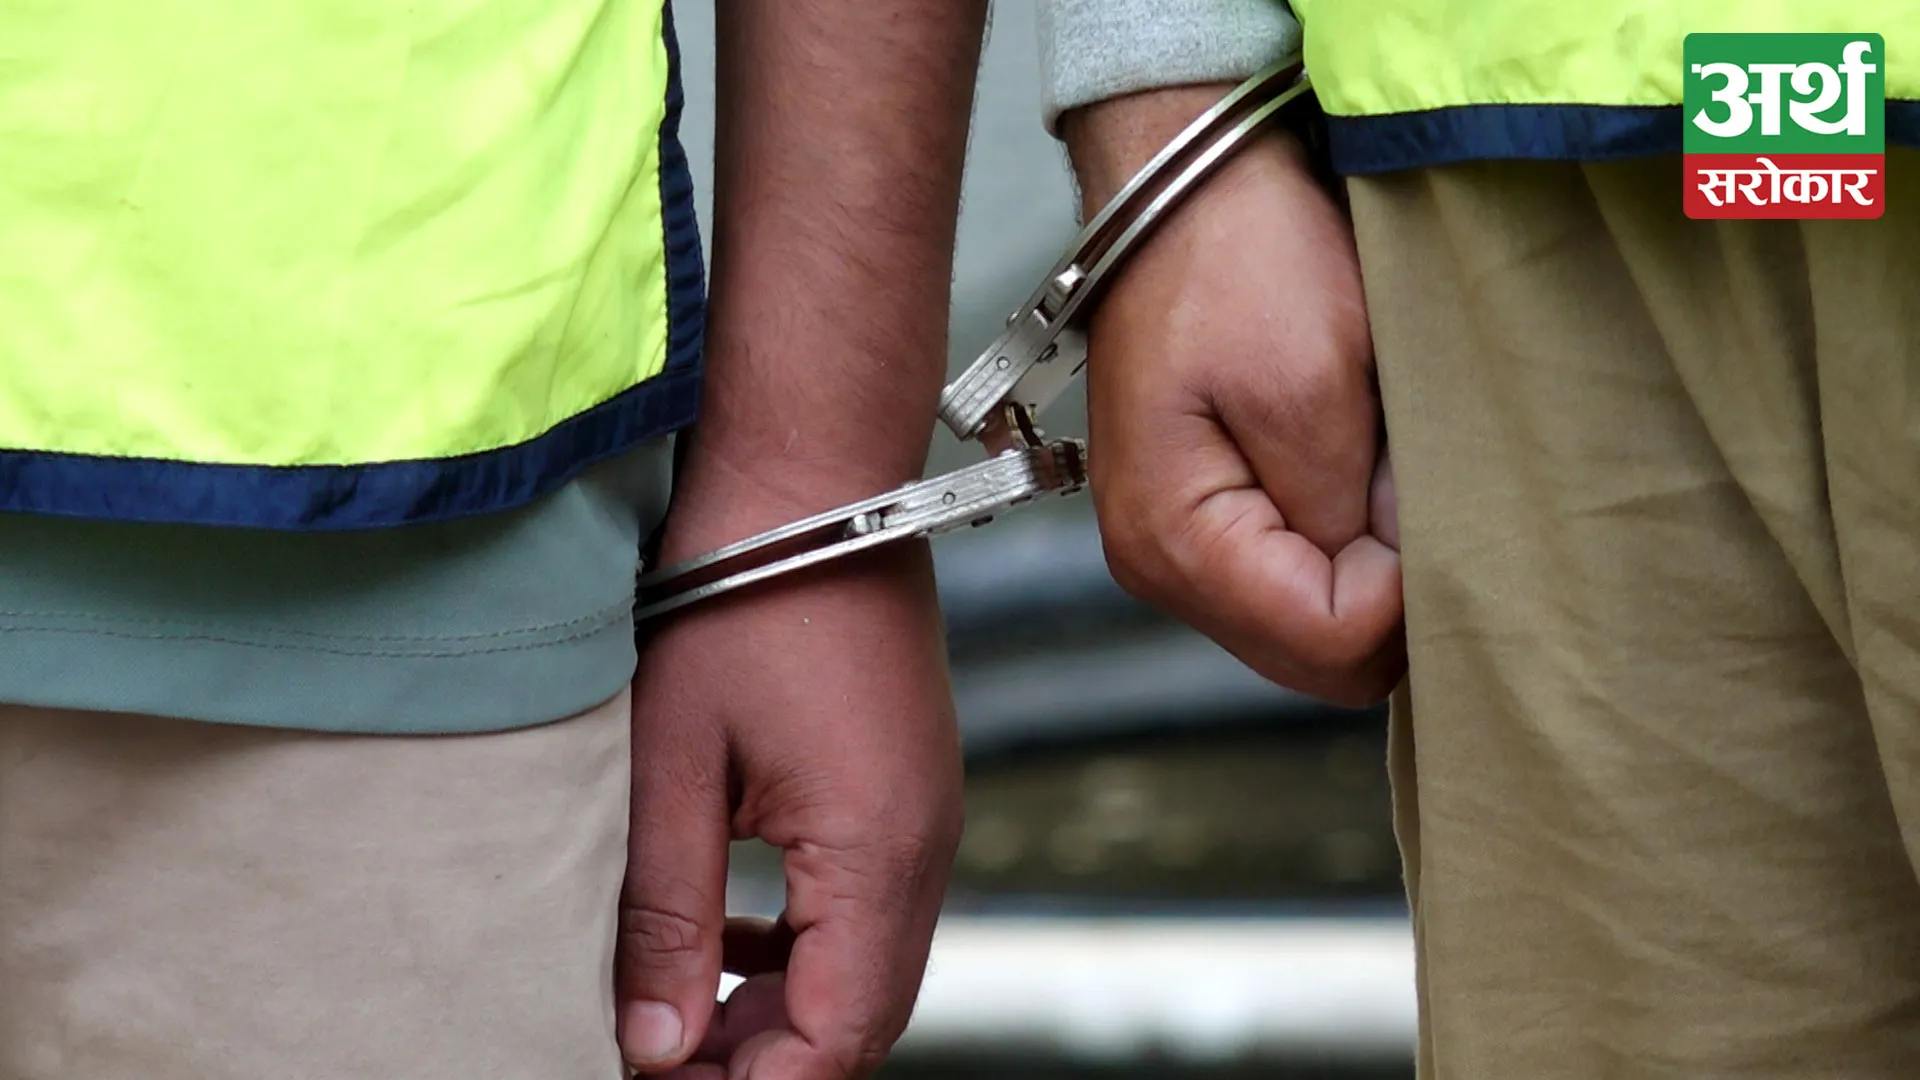 Five Bangladeshis were arrested for overstaying in Nepal